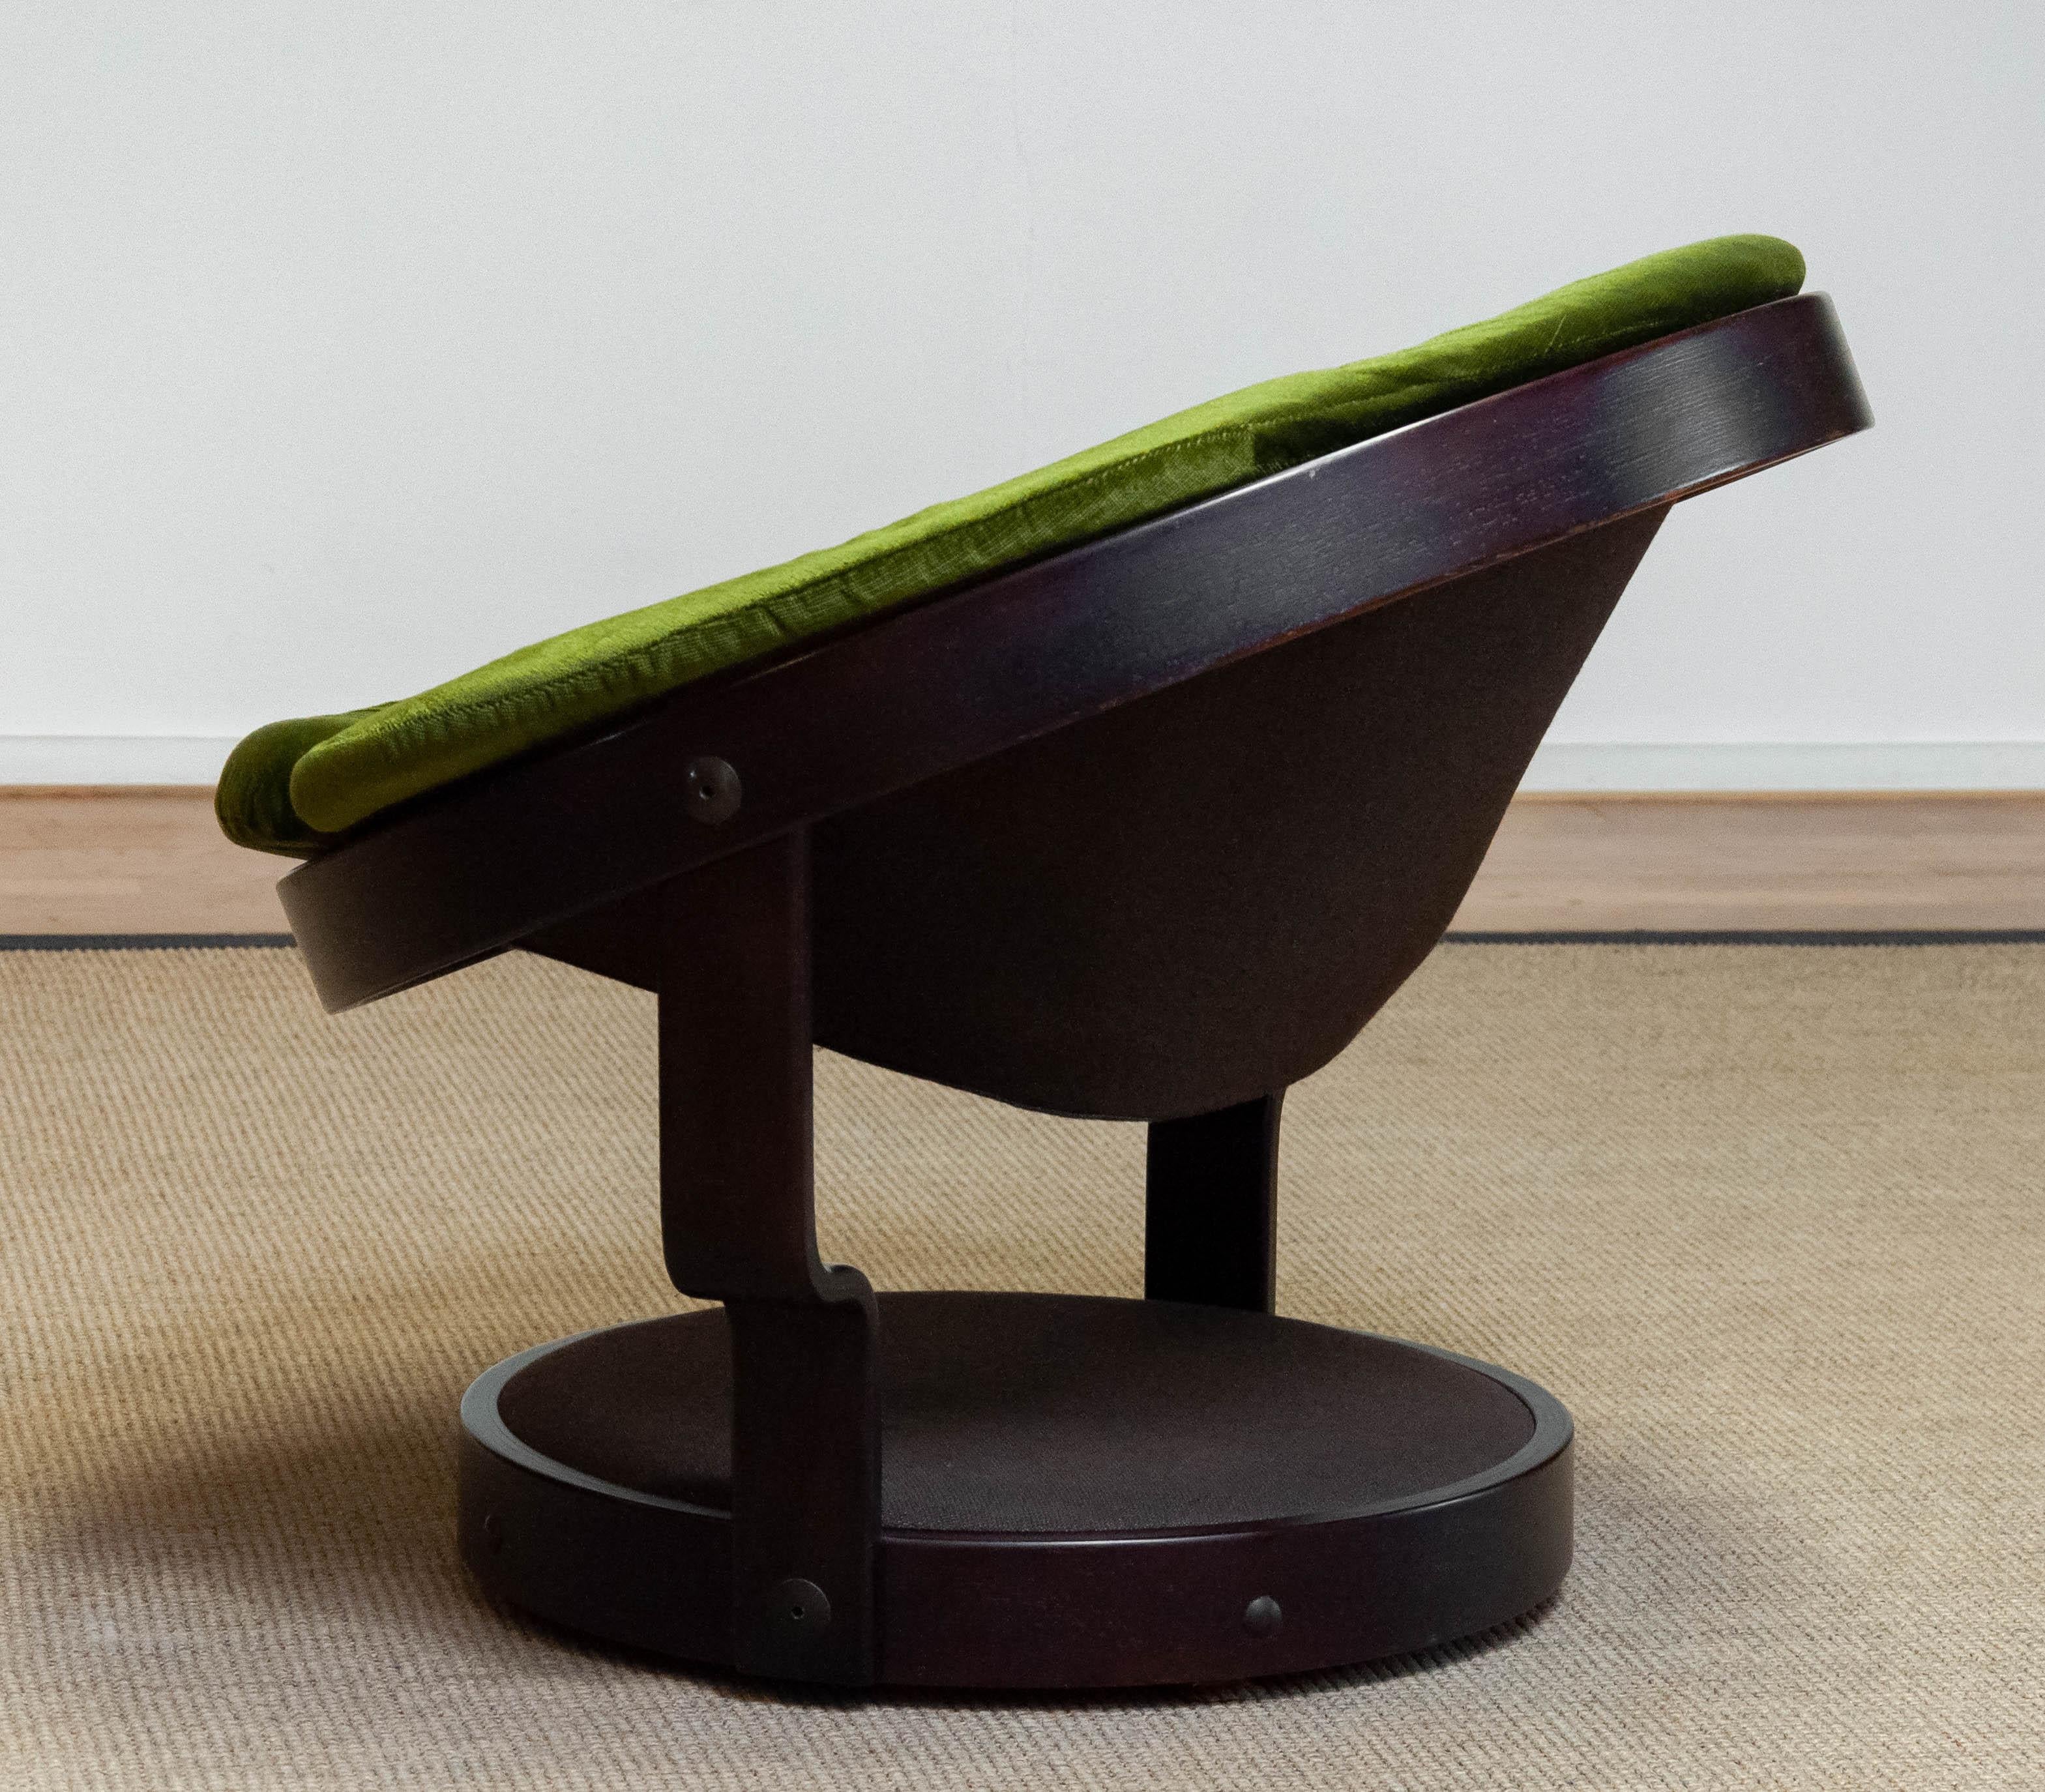 Late 20th Century Circular Swivel Lounge Chair Model 'Convair' in Green Velvet by Oddmund Vad For Sale